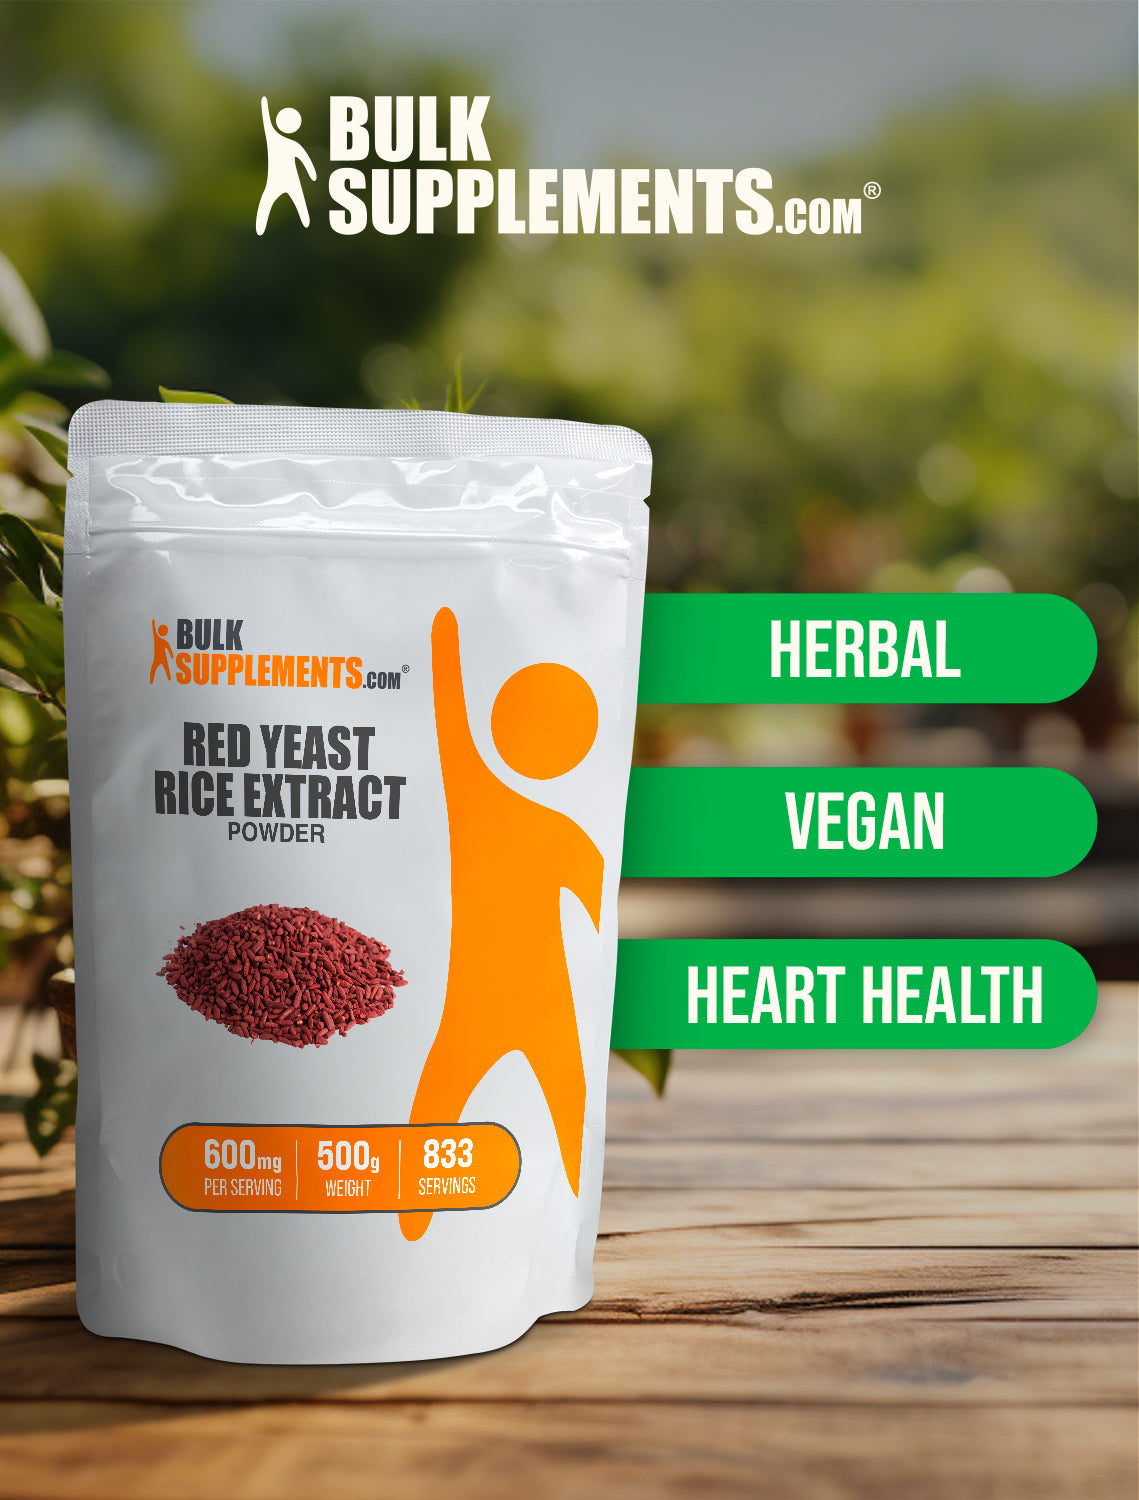 Red Yeast Rice Extract powder keyword image 500g